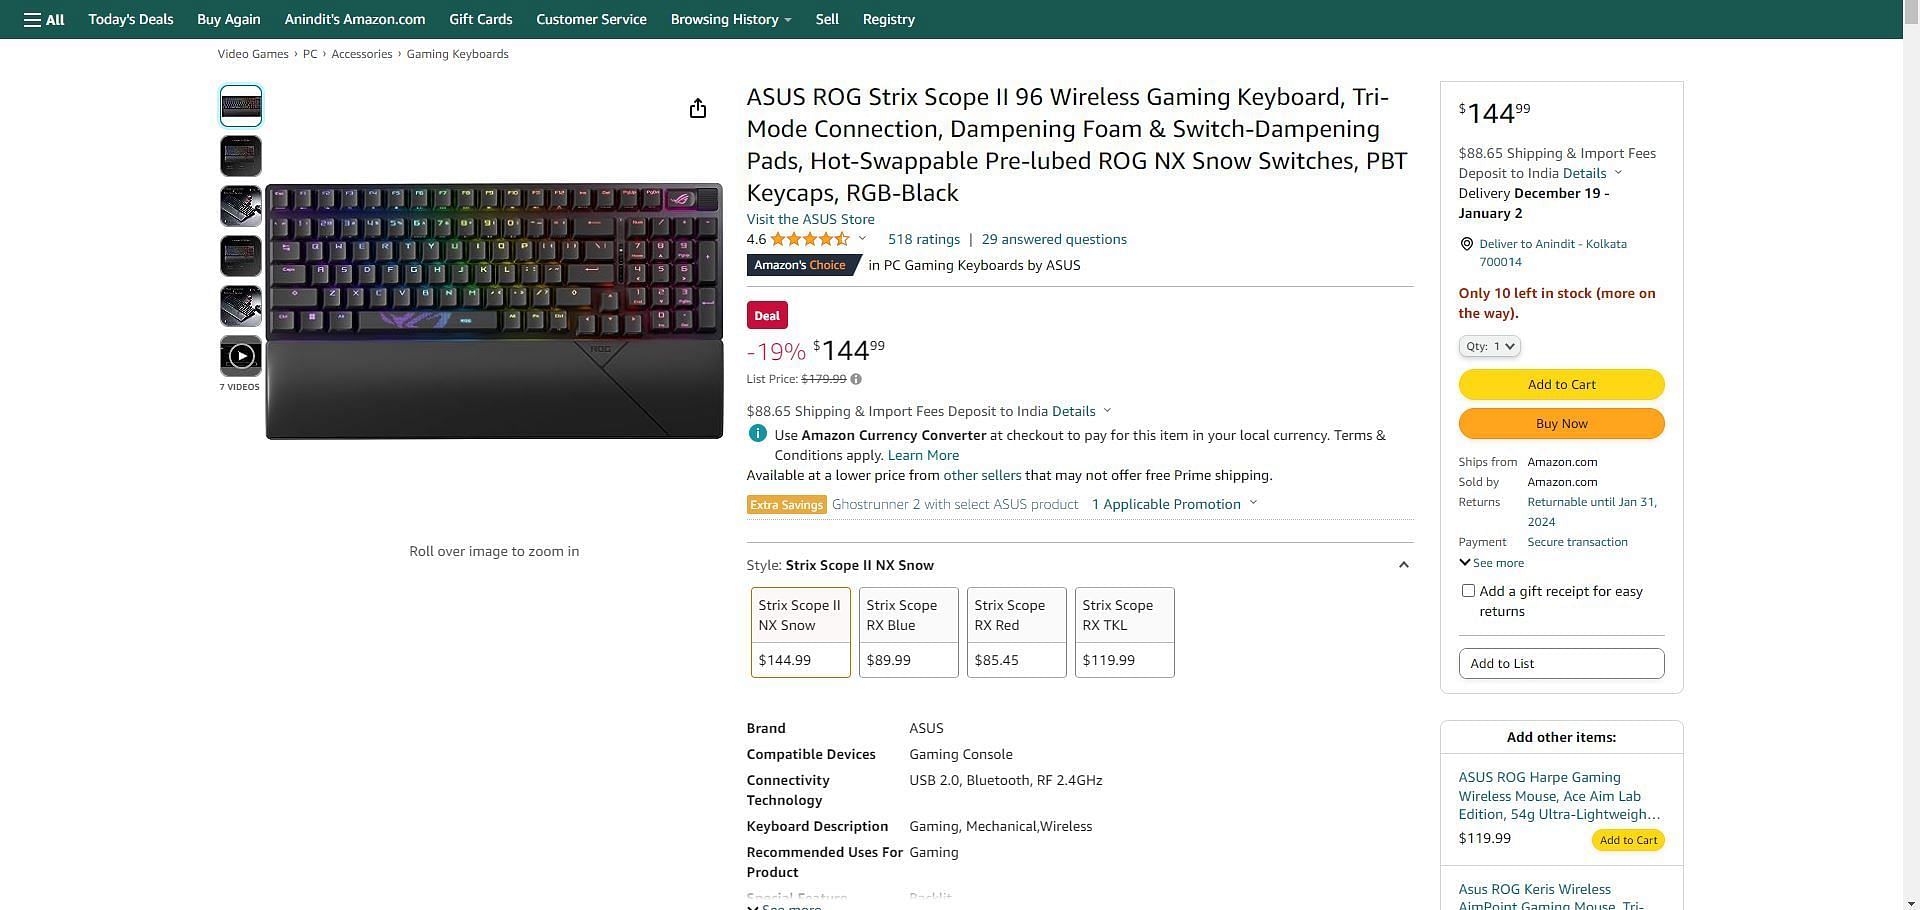 The ROG Strix might be the keyboard you are looking for during the End of Year Holiday Sale (Image via Amazon)